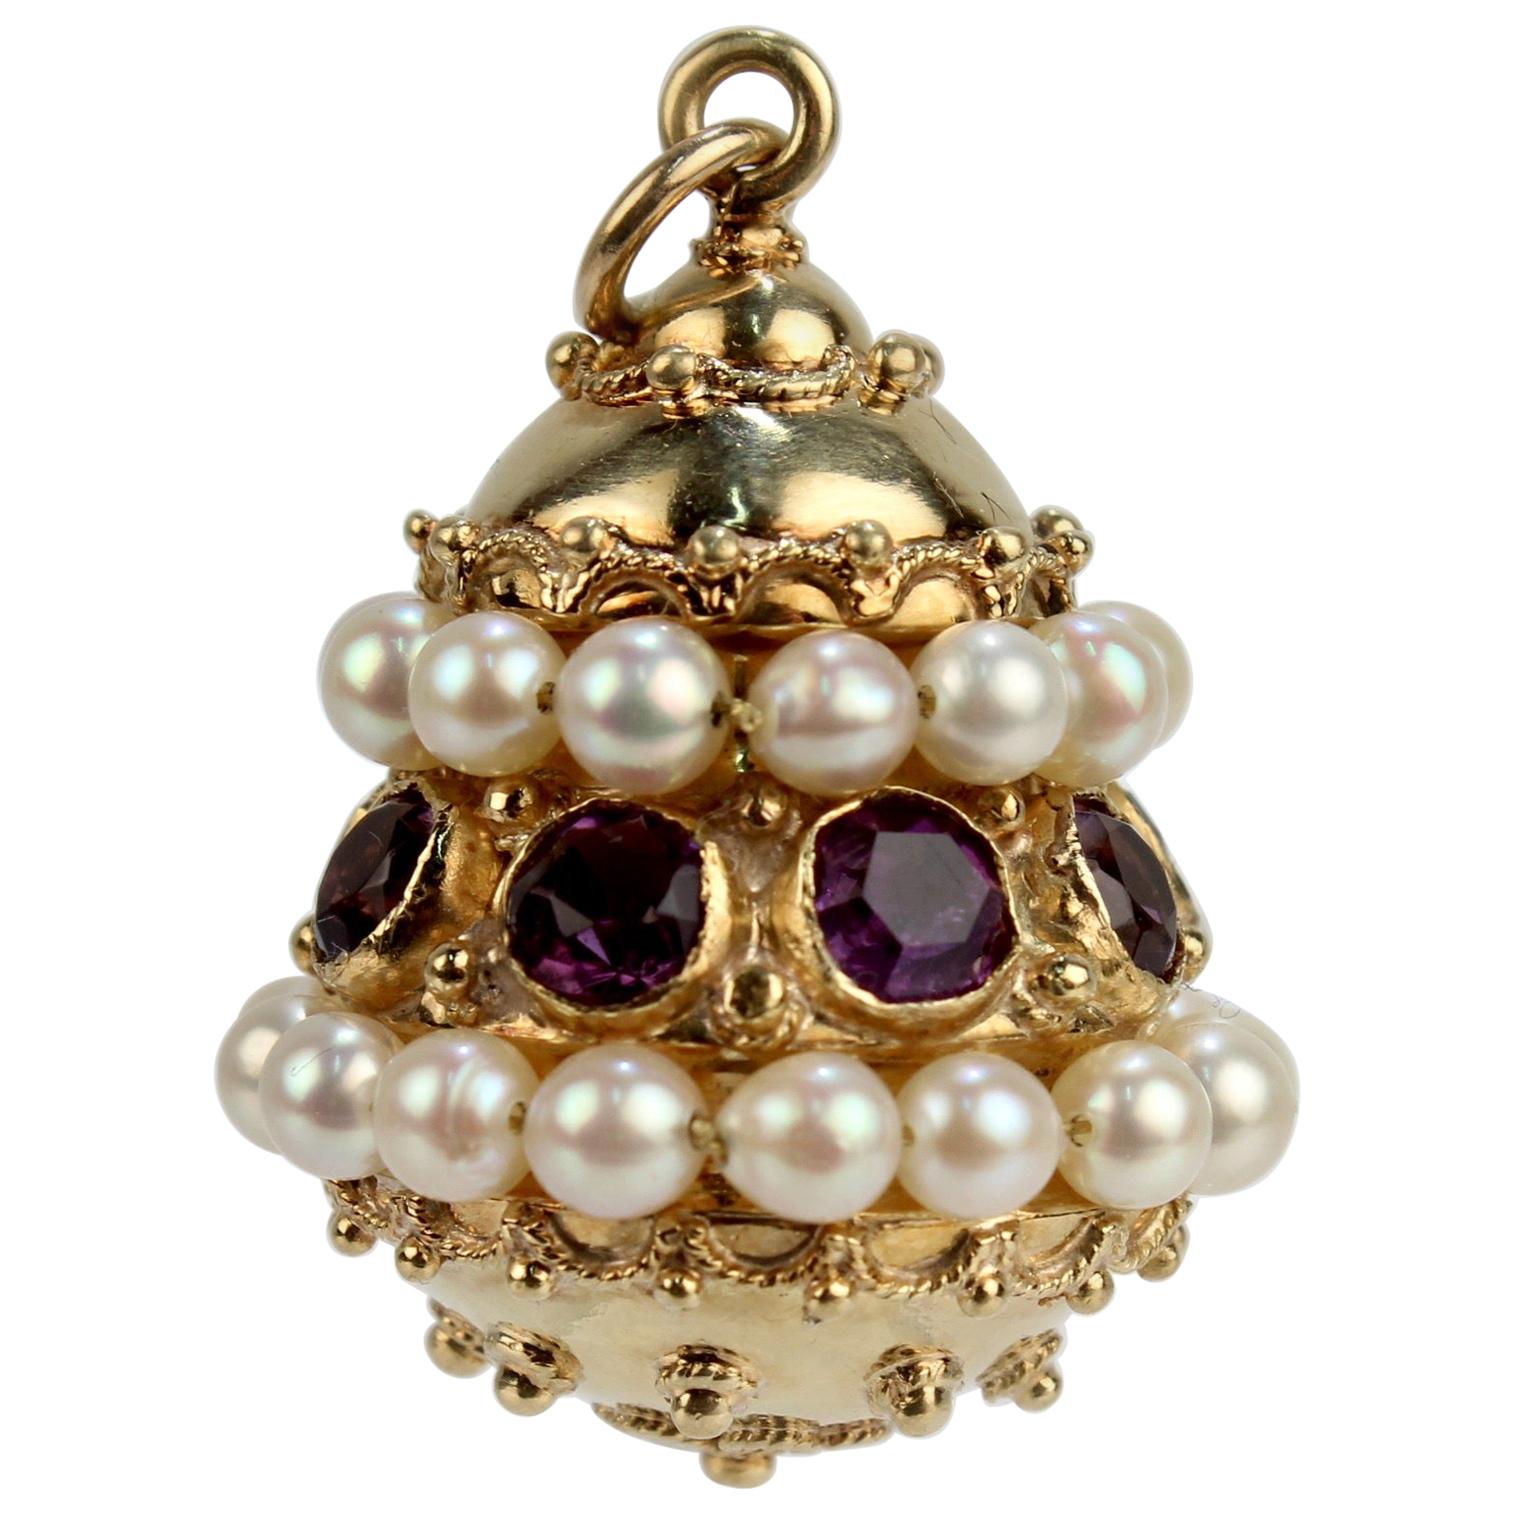 Etruscan Revival 18 Karat Gold, Amethyst, and Pearl Charm or Pendant